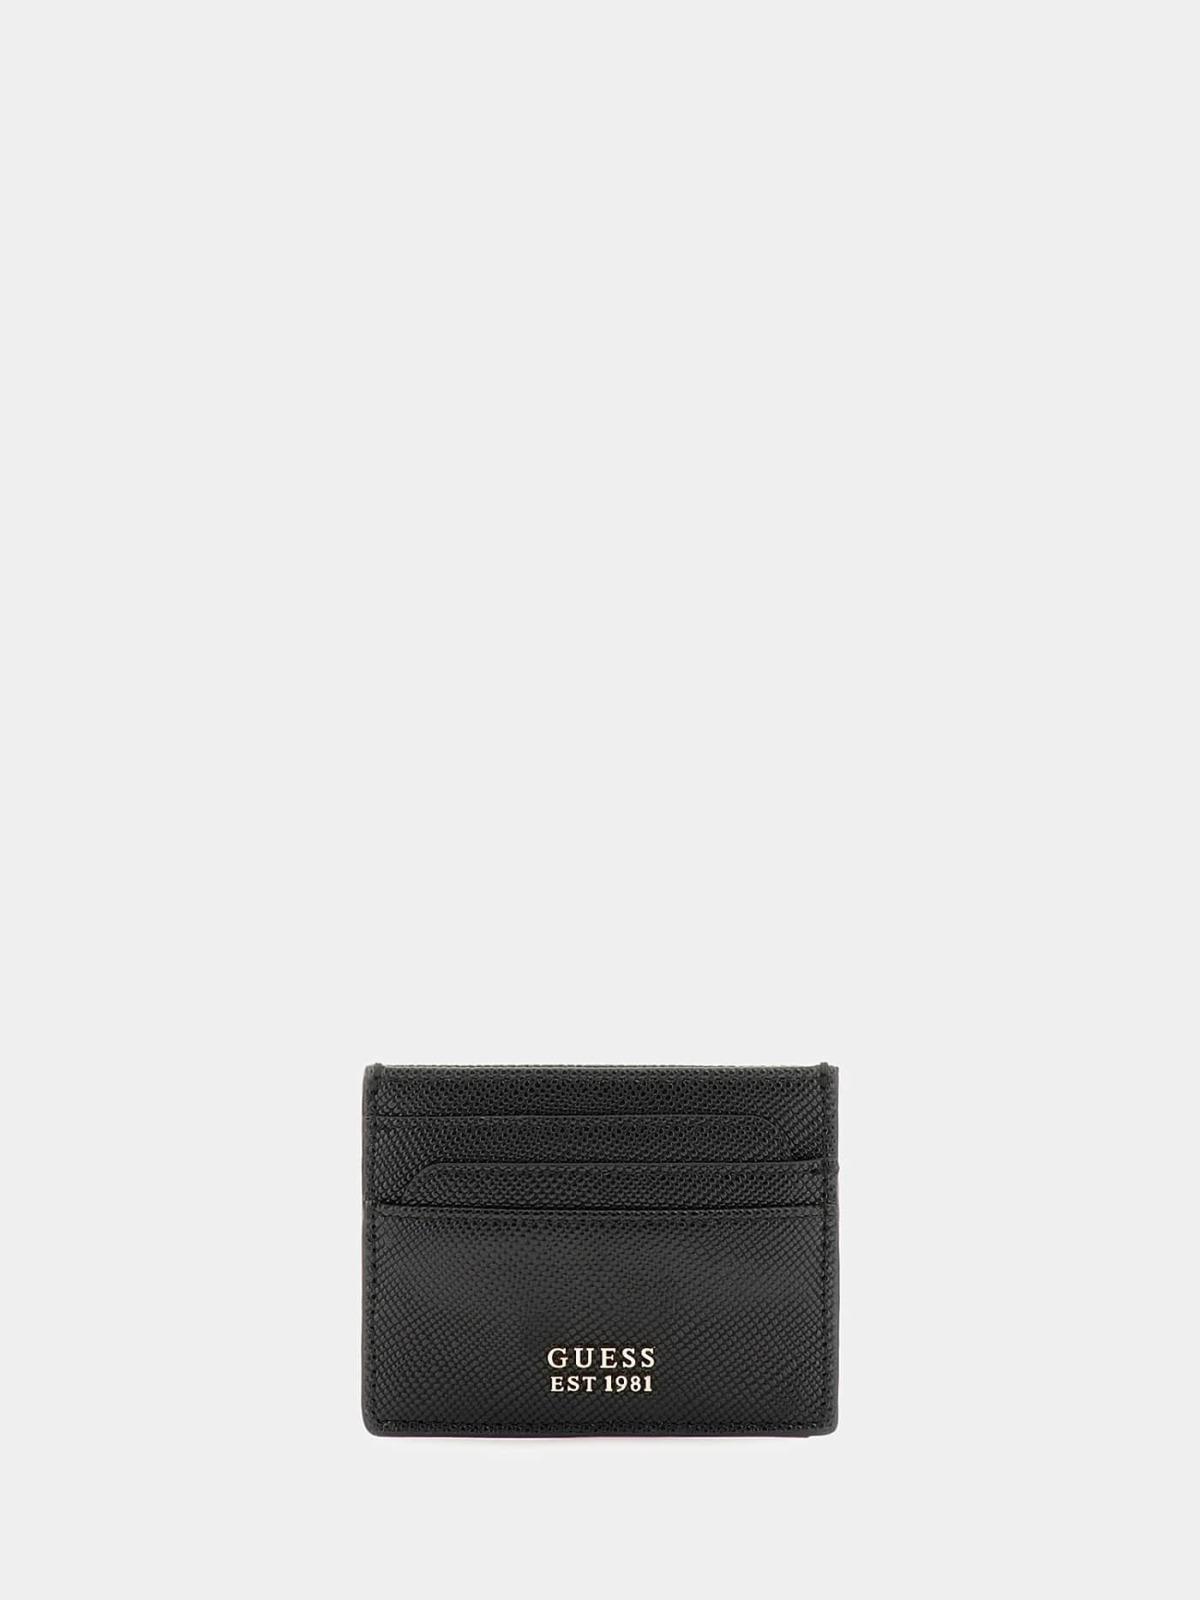 Card Holder in Black - Guess Woman GOOFASH